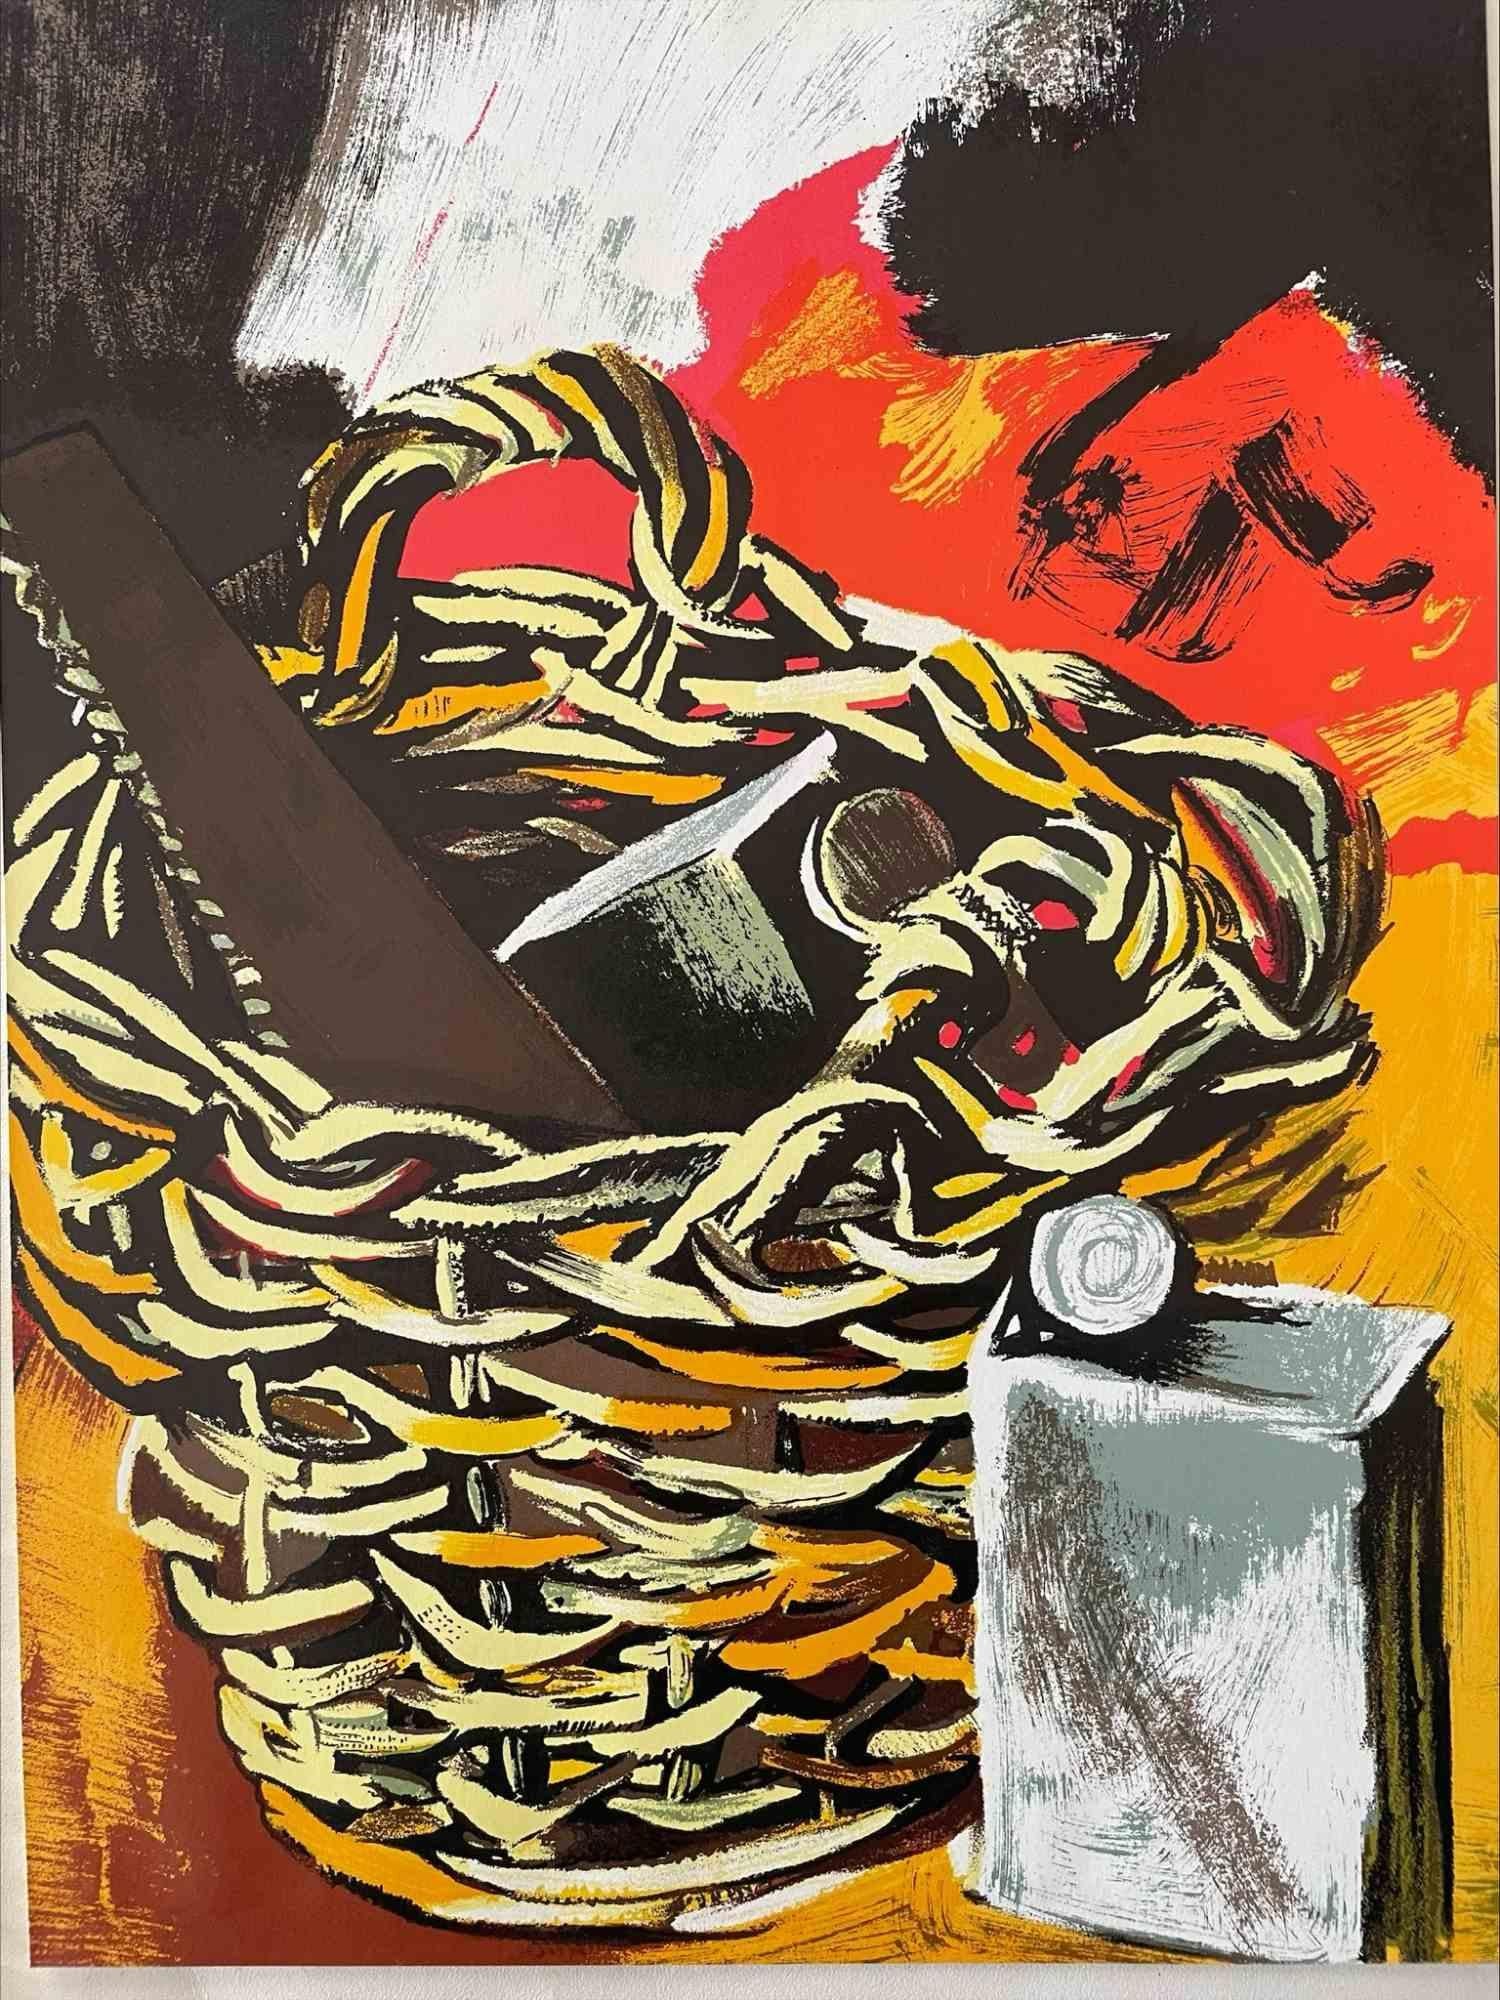 Hommage à Guttuso - Basket and Saw  is a print by the Sicilian artist Renato Guttuso (Bagheria, 1911 - Rome, 1987).

A high-quality chromolithograph on paper, edited by the French magazine XXe Siécle , and published on the special number issue